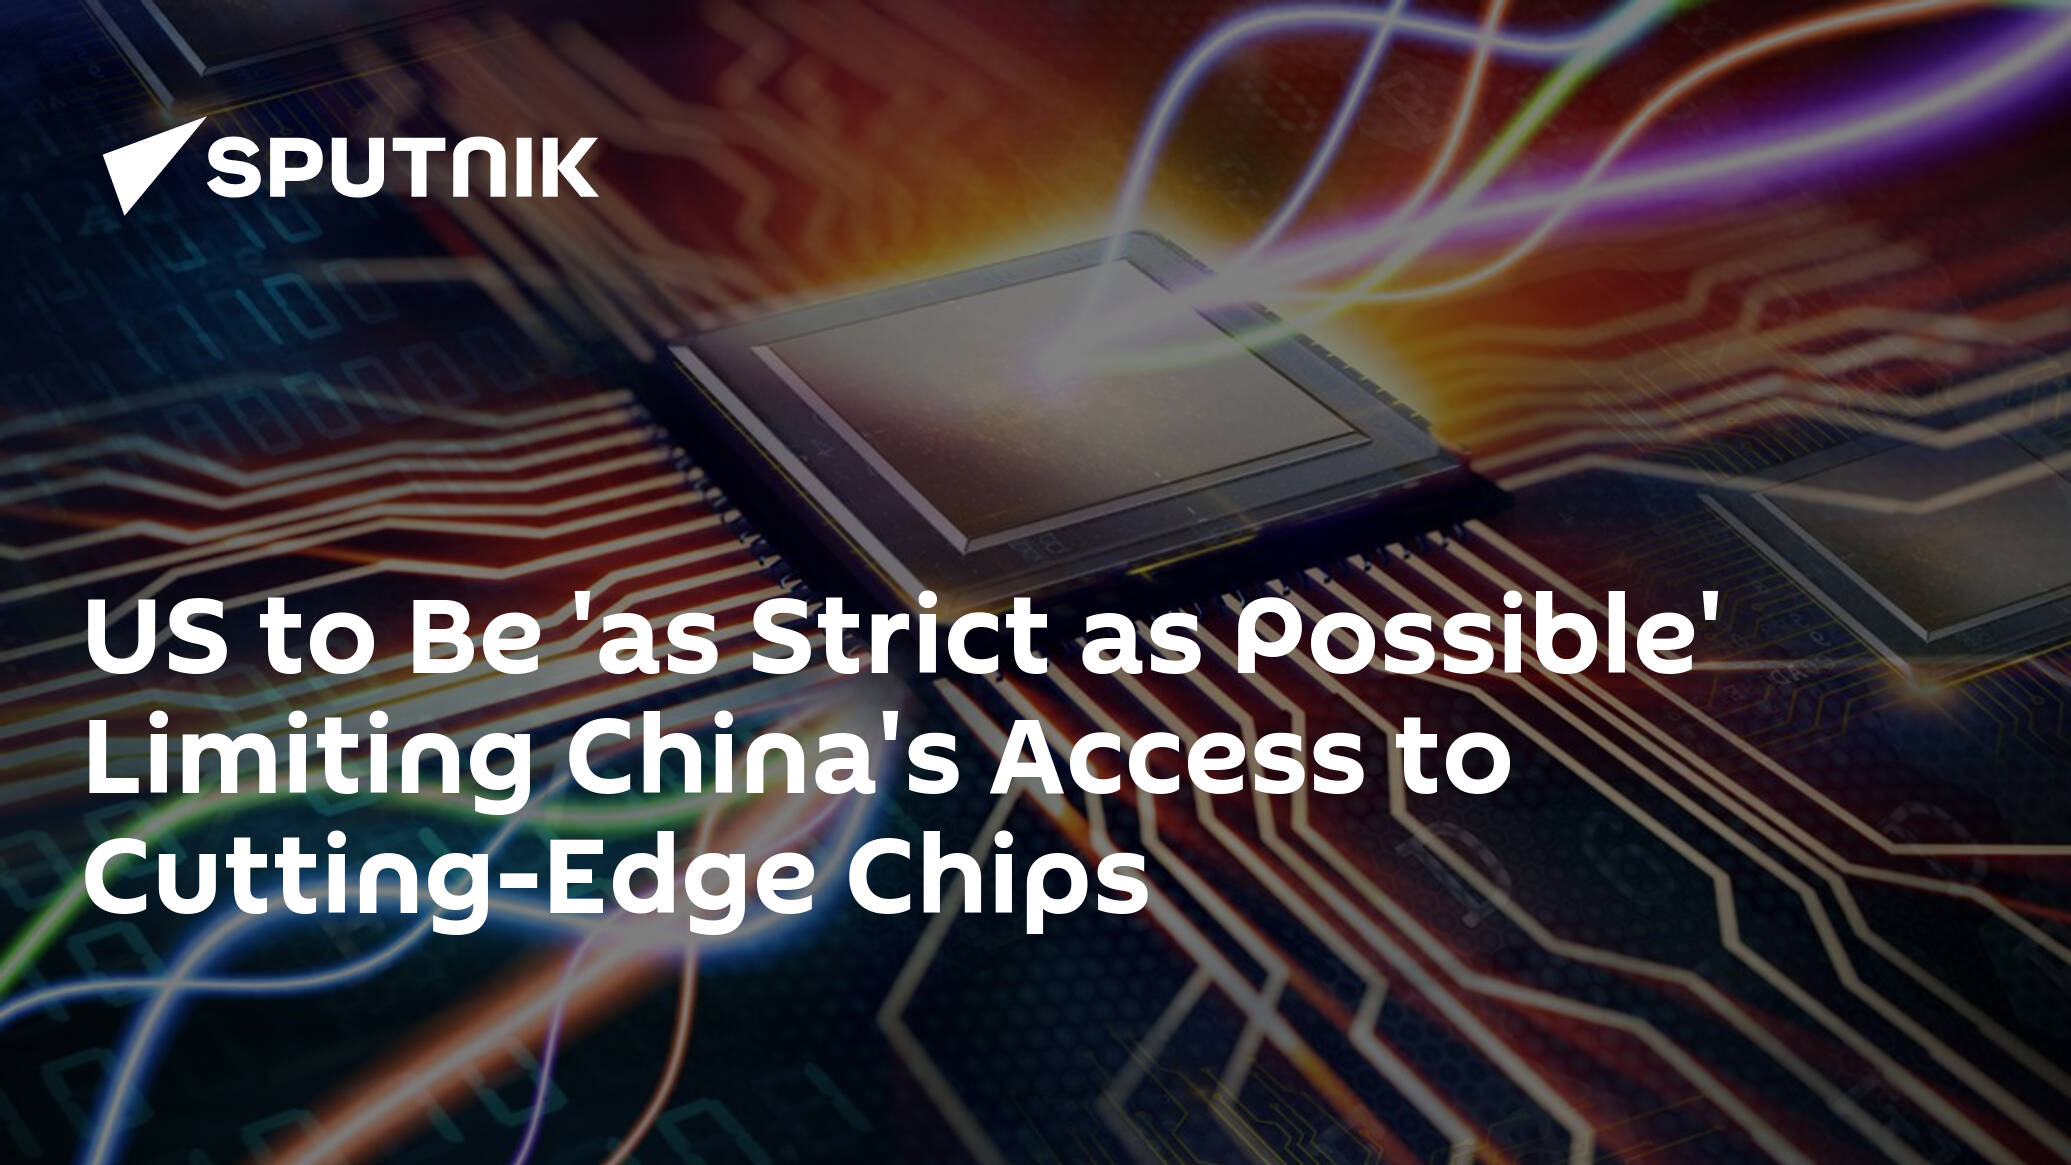 US to Be 'as Strict as Possible' Limiting China's Access to Cutting-Edge Chips